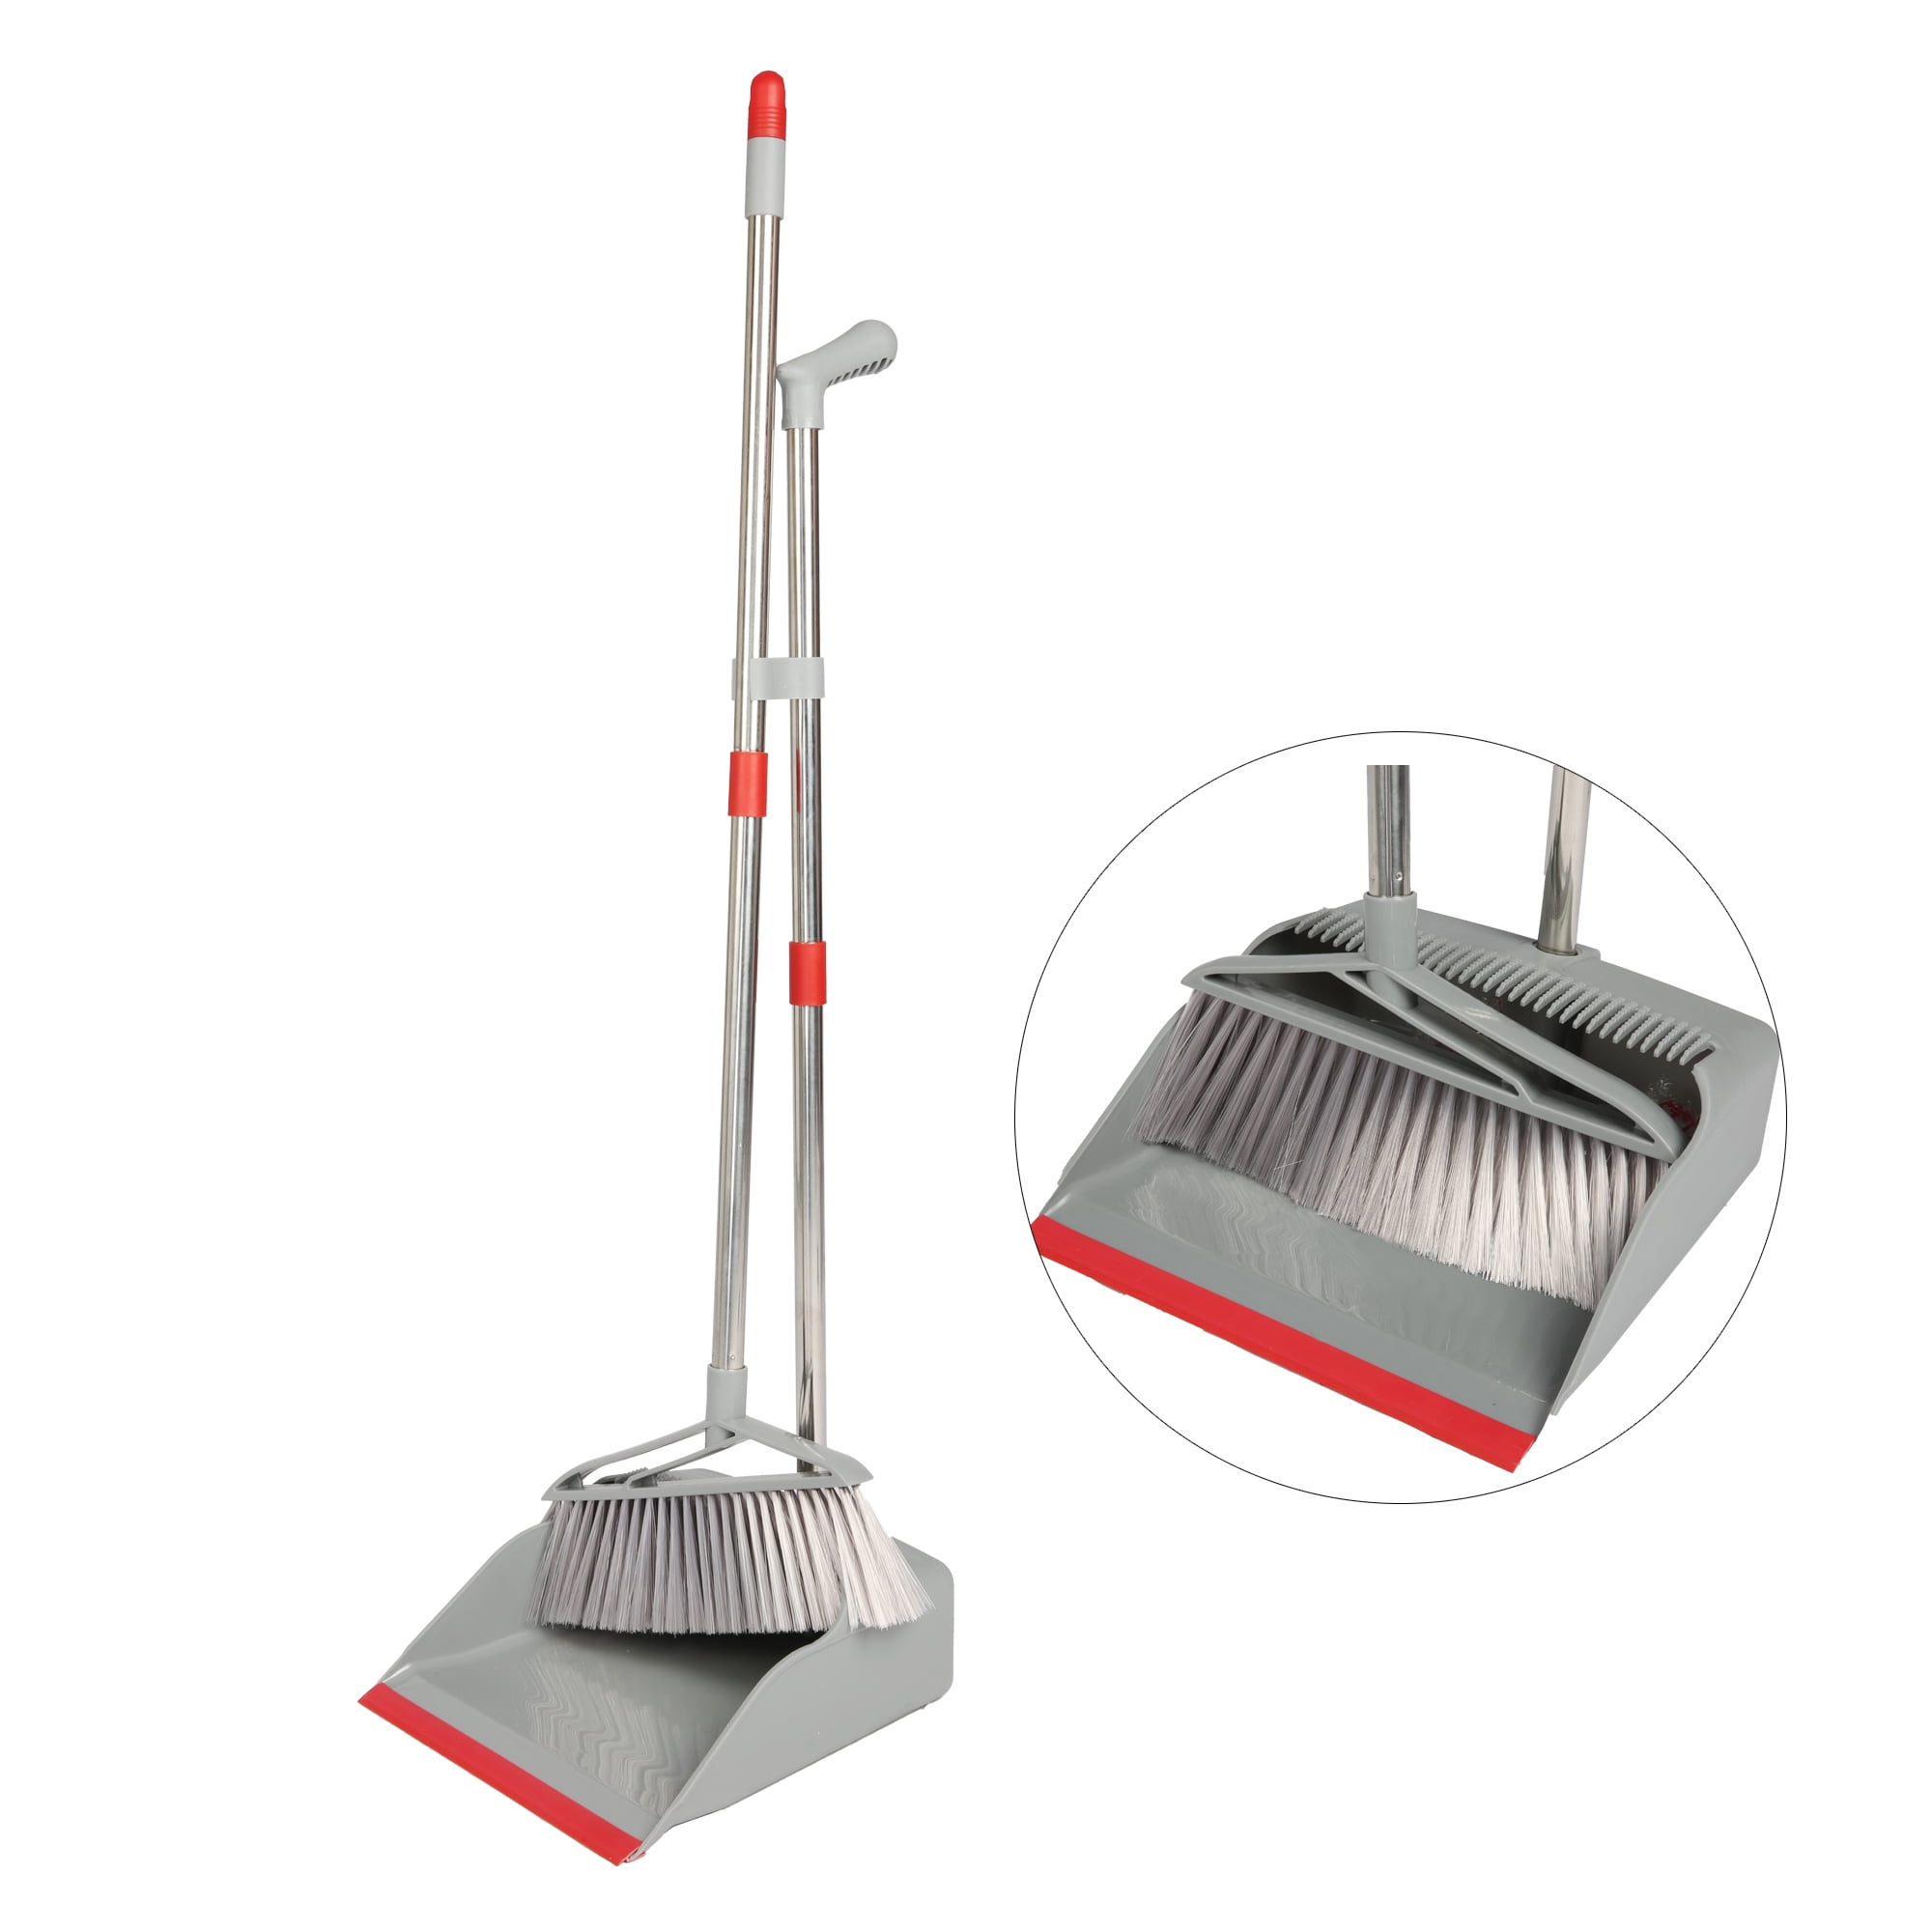 Upright Broom and Dustpan with SANGFOR Broom and Dustpan Set Cleaning Supplies 